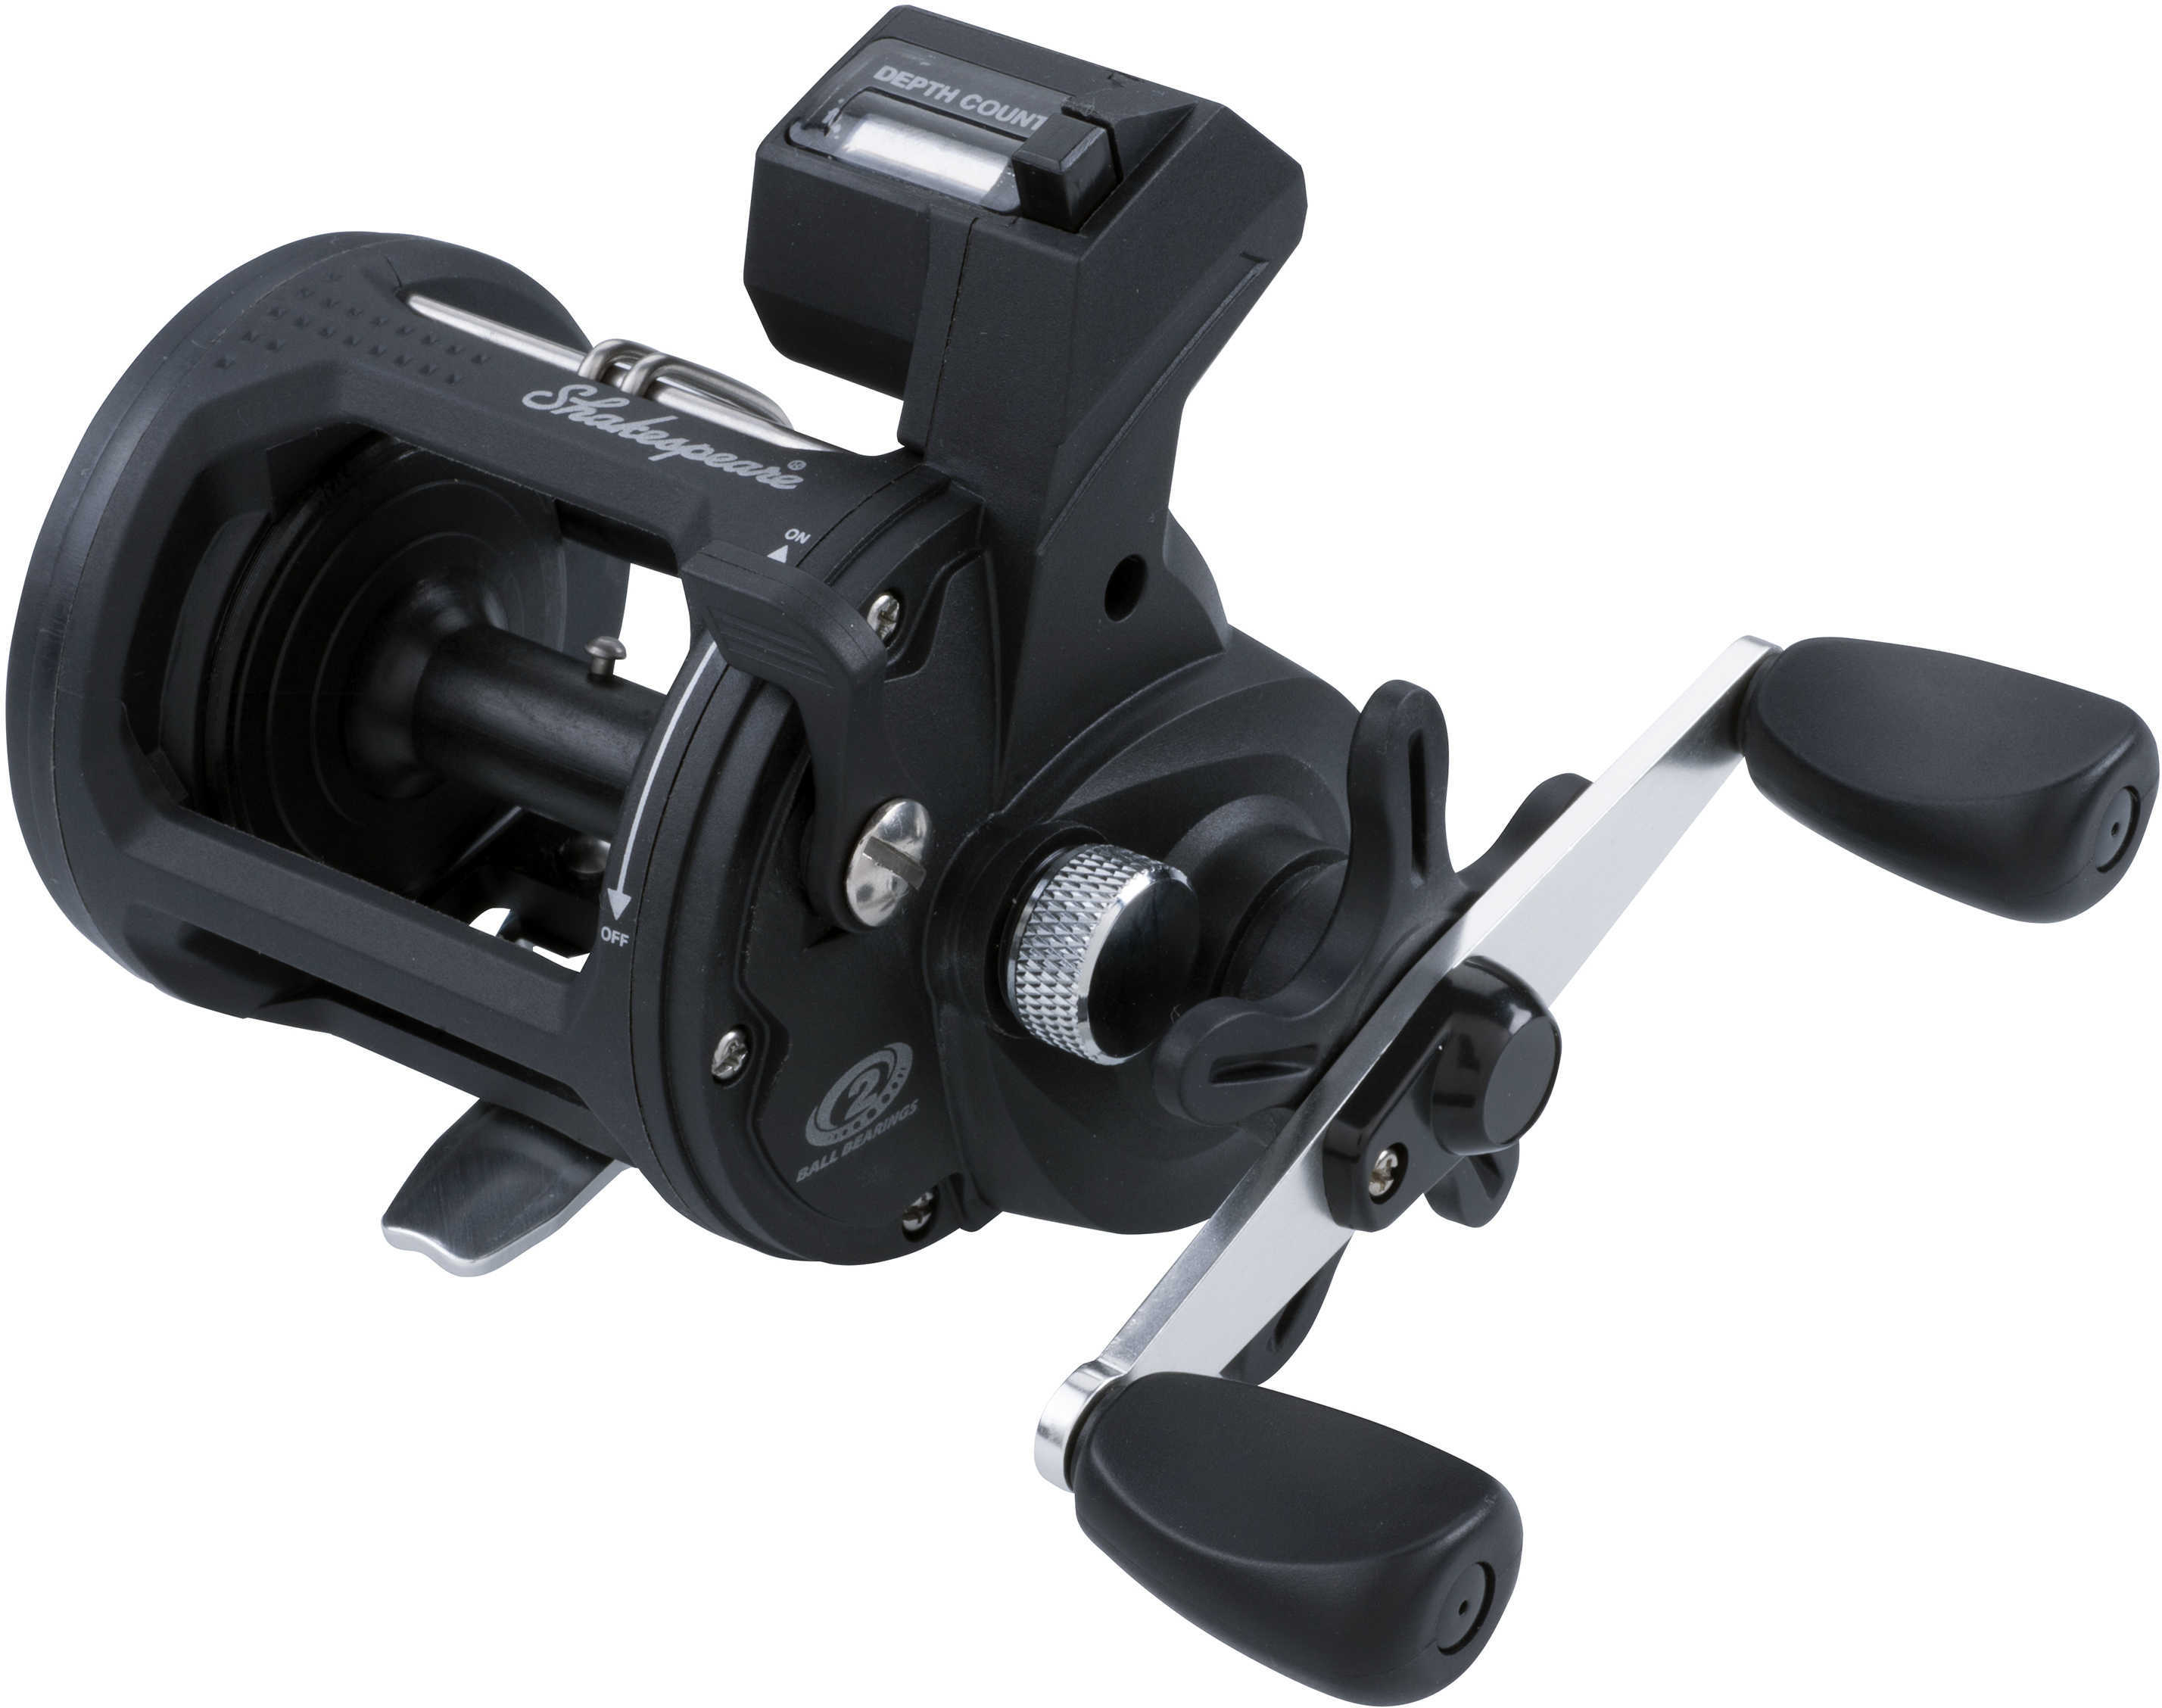 Shakespeare ATS Trolling Reels 15, 5.1:1 Gear Ratio, 2 Bearings, 15 lb Max Drag, Right Hand, Clam Package Md: 13